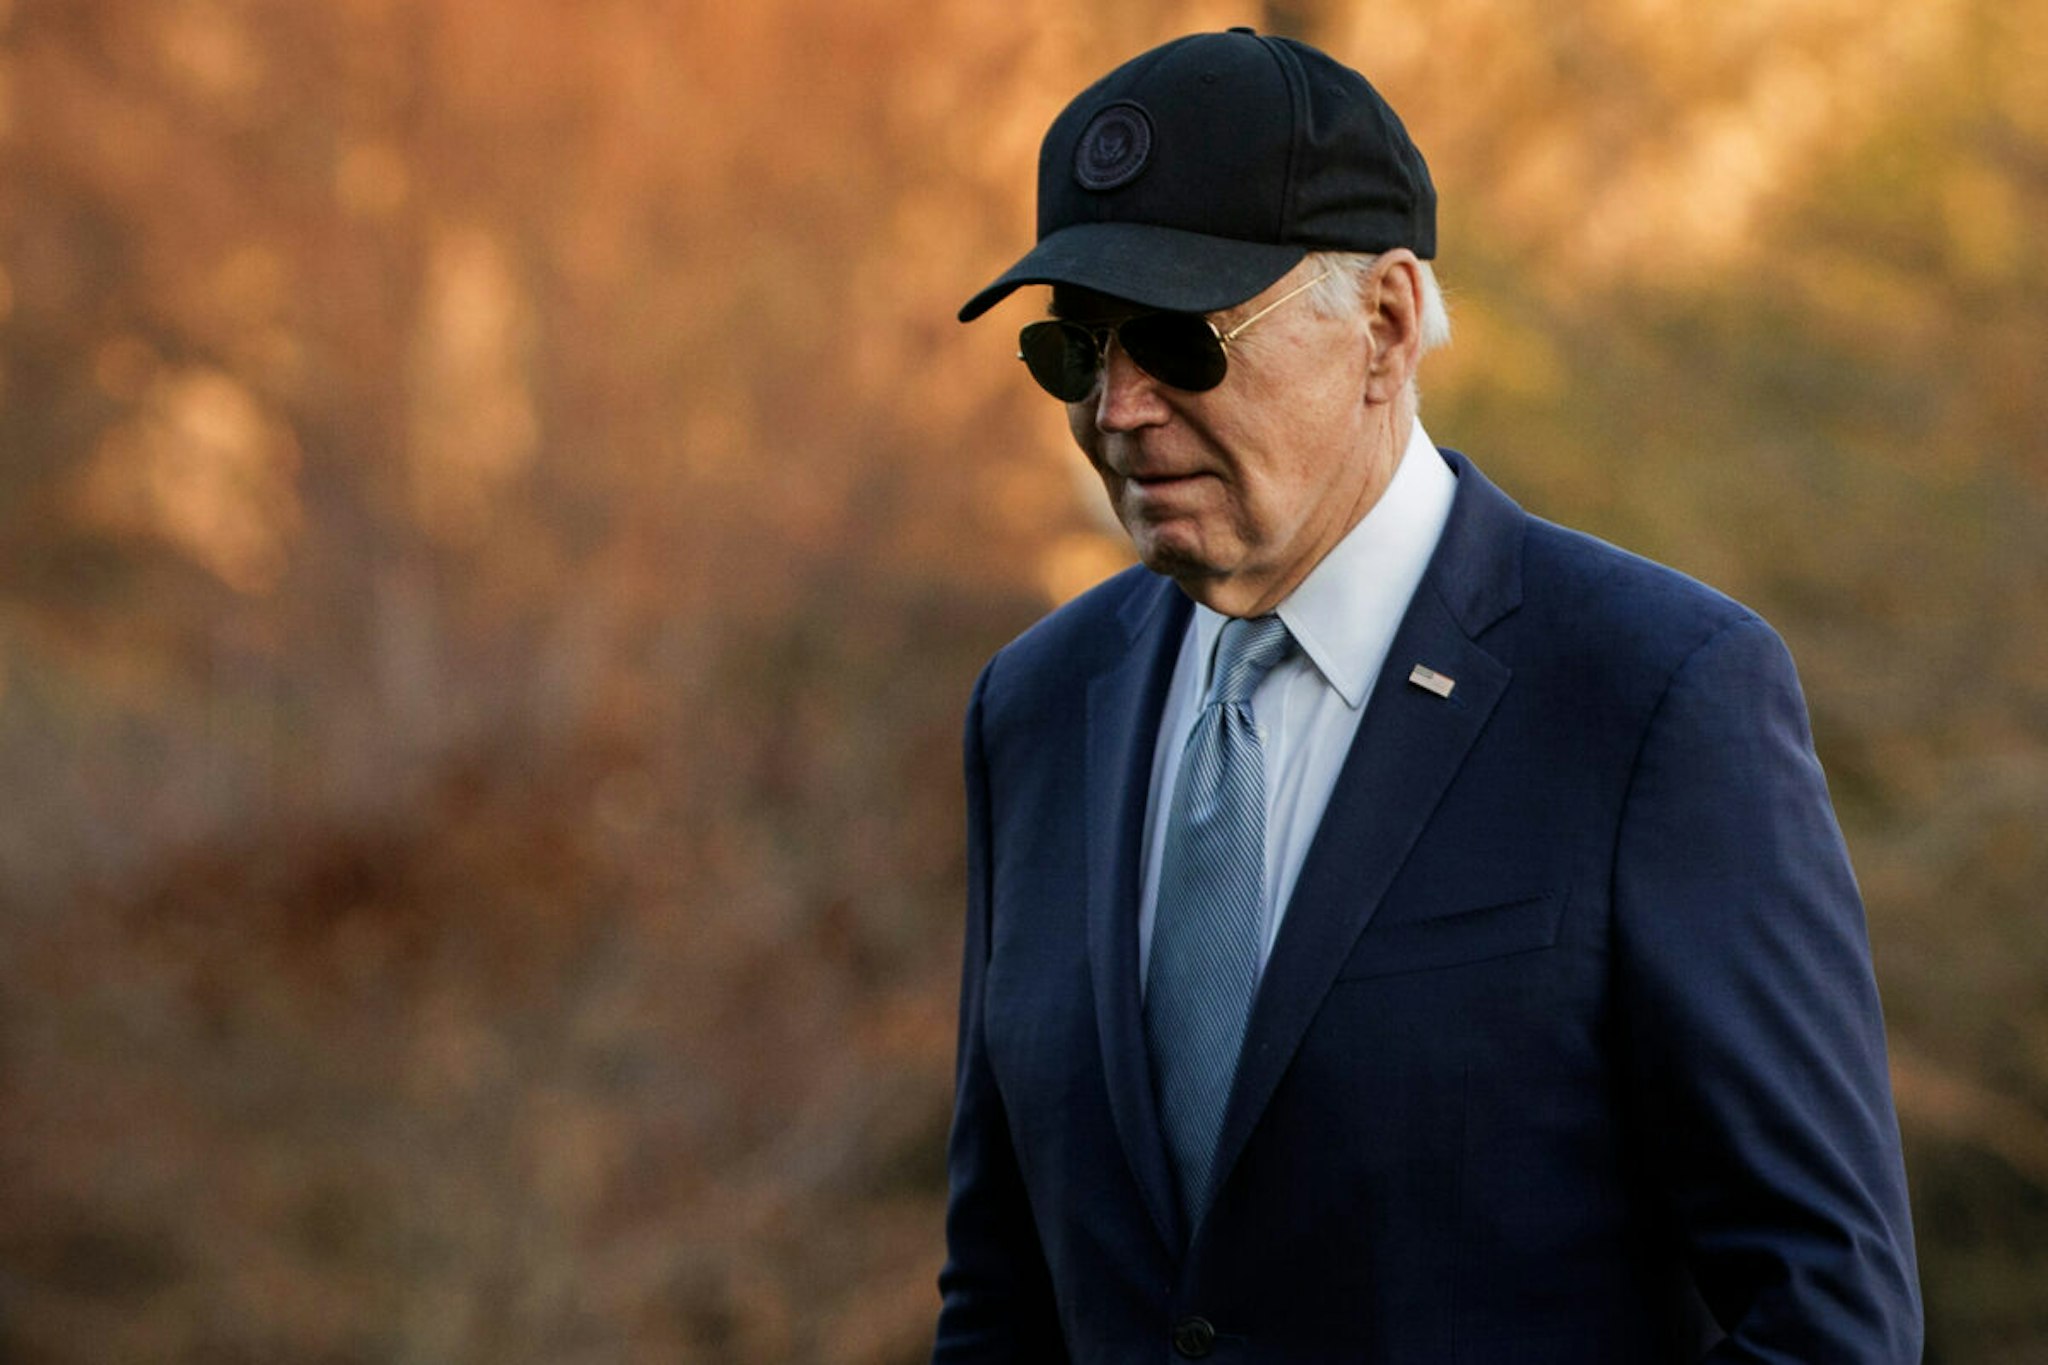 US President Joe Biden walks on the South Lawn of the White House after arriving on Marine One in Washington, DC, US, on Thursday, March 21, 2024. A lawsuit filed against President Joe Biden and the US Department of Energy in Louisiana federal court on Thursday asks a judge to overturn the temporary pause of new licenses to export natural gas via ocean-going tankers.